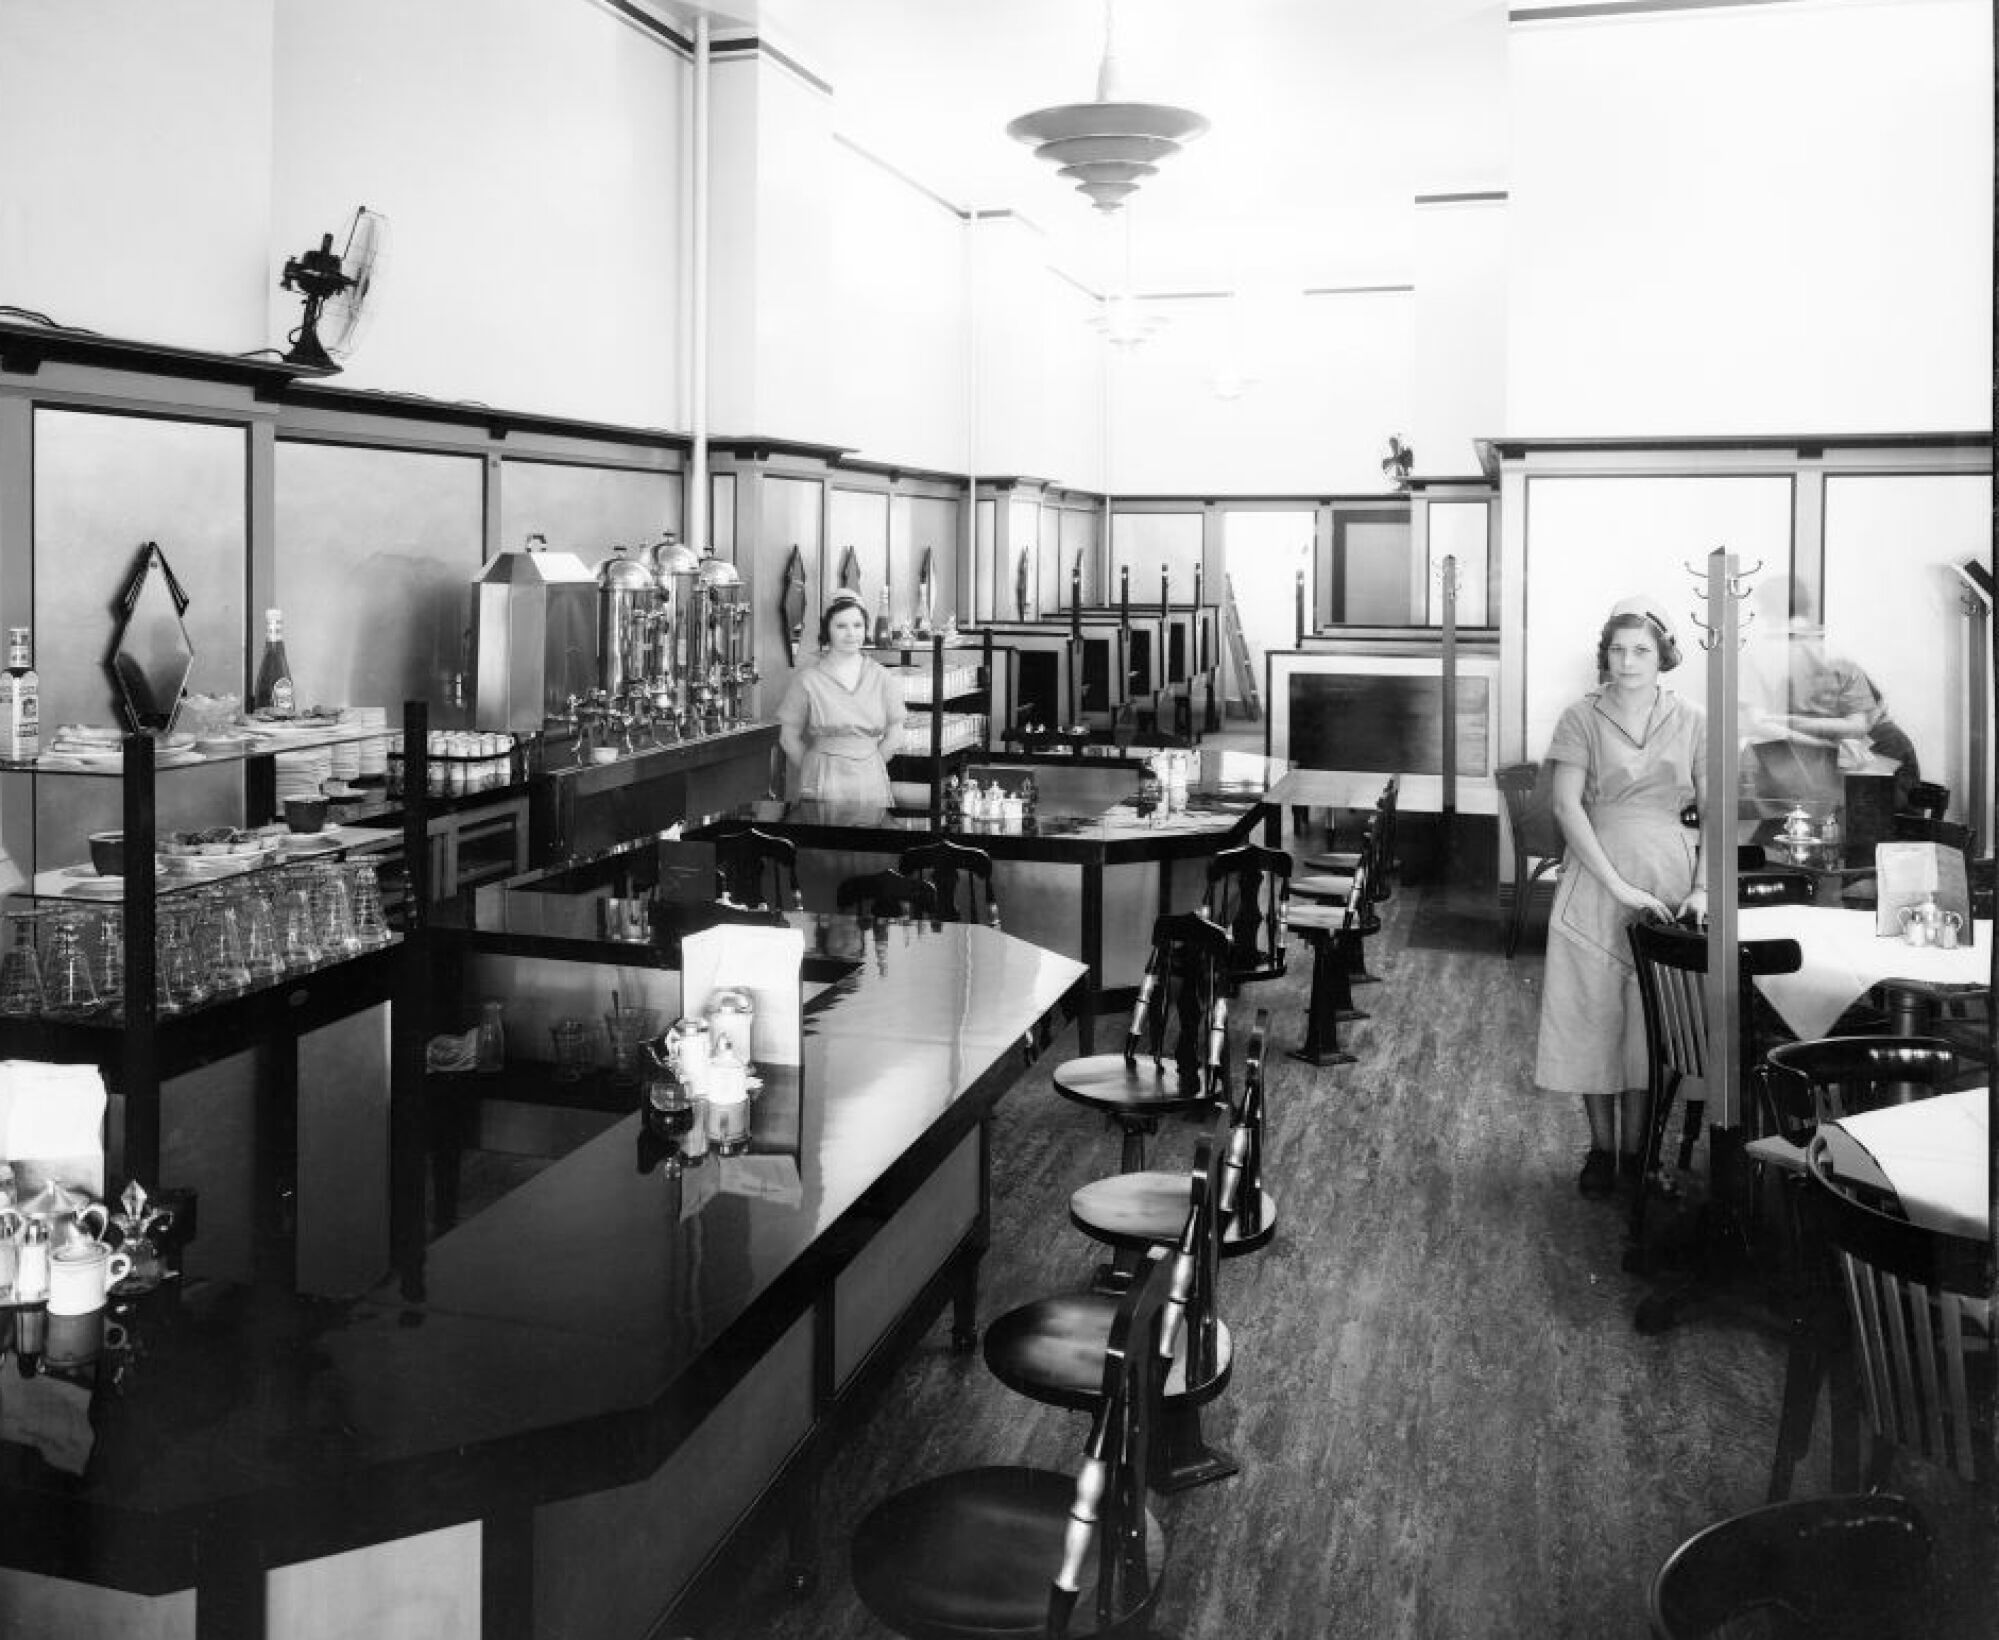 Black and white image of the interior of a restaurant, which features a counter and several tables. Three women in waitress uniforms are present: one at the far left, one in the middle, and one at the far right of the frame.